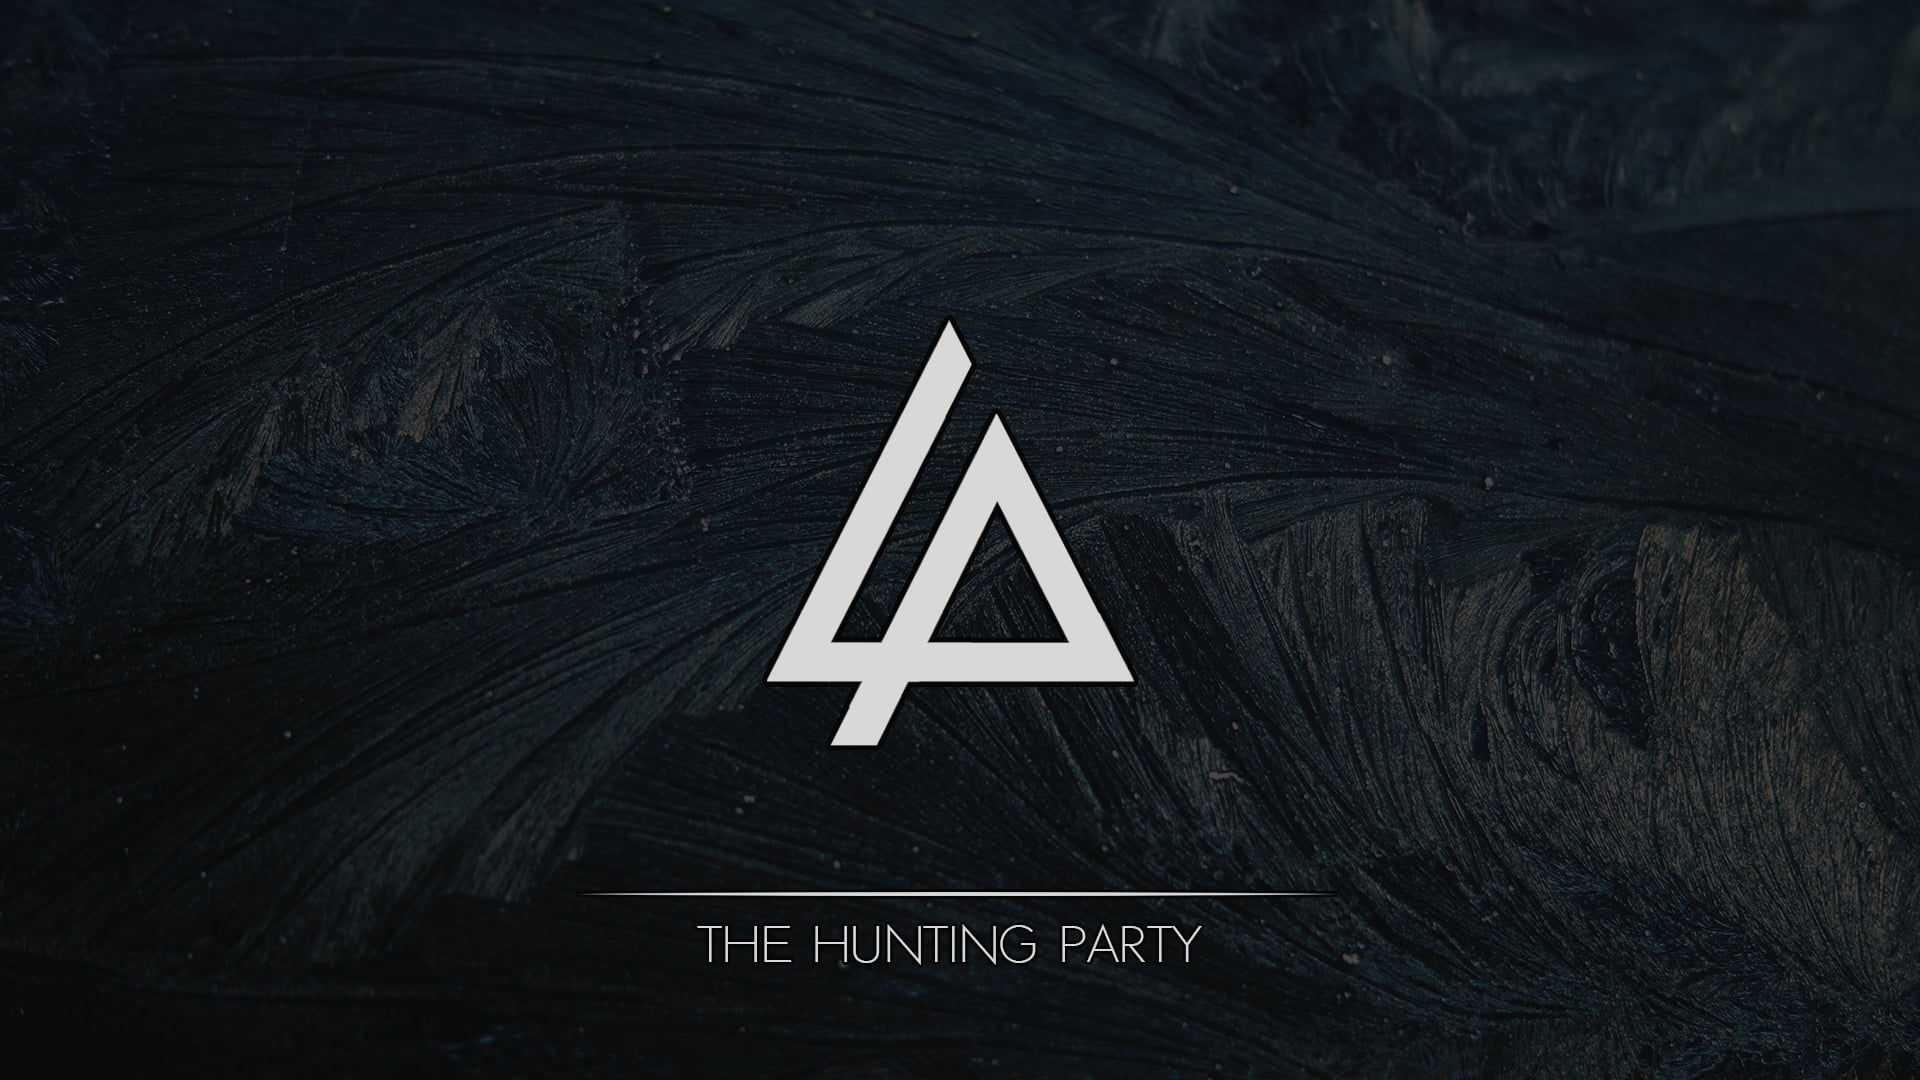 The Hunting Party illustration, music, Linkin Park, symbol, sign